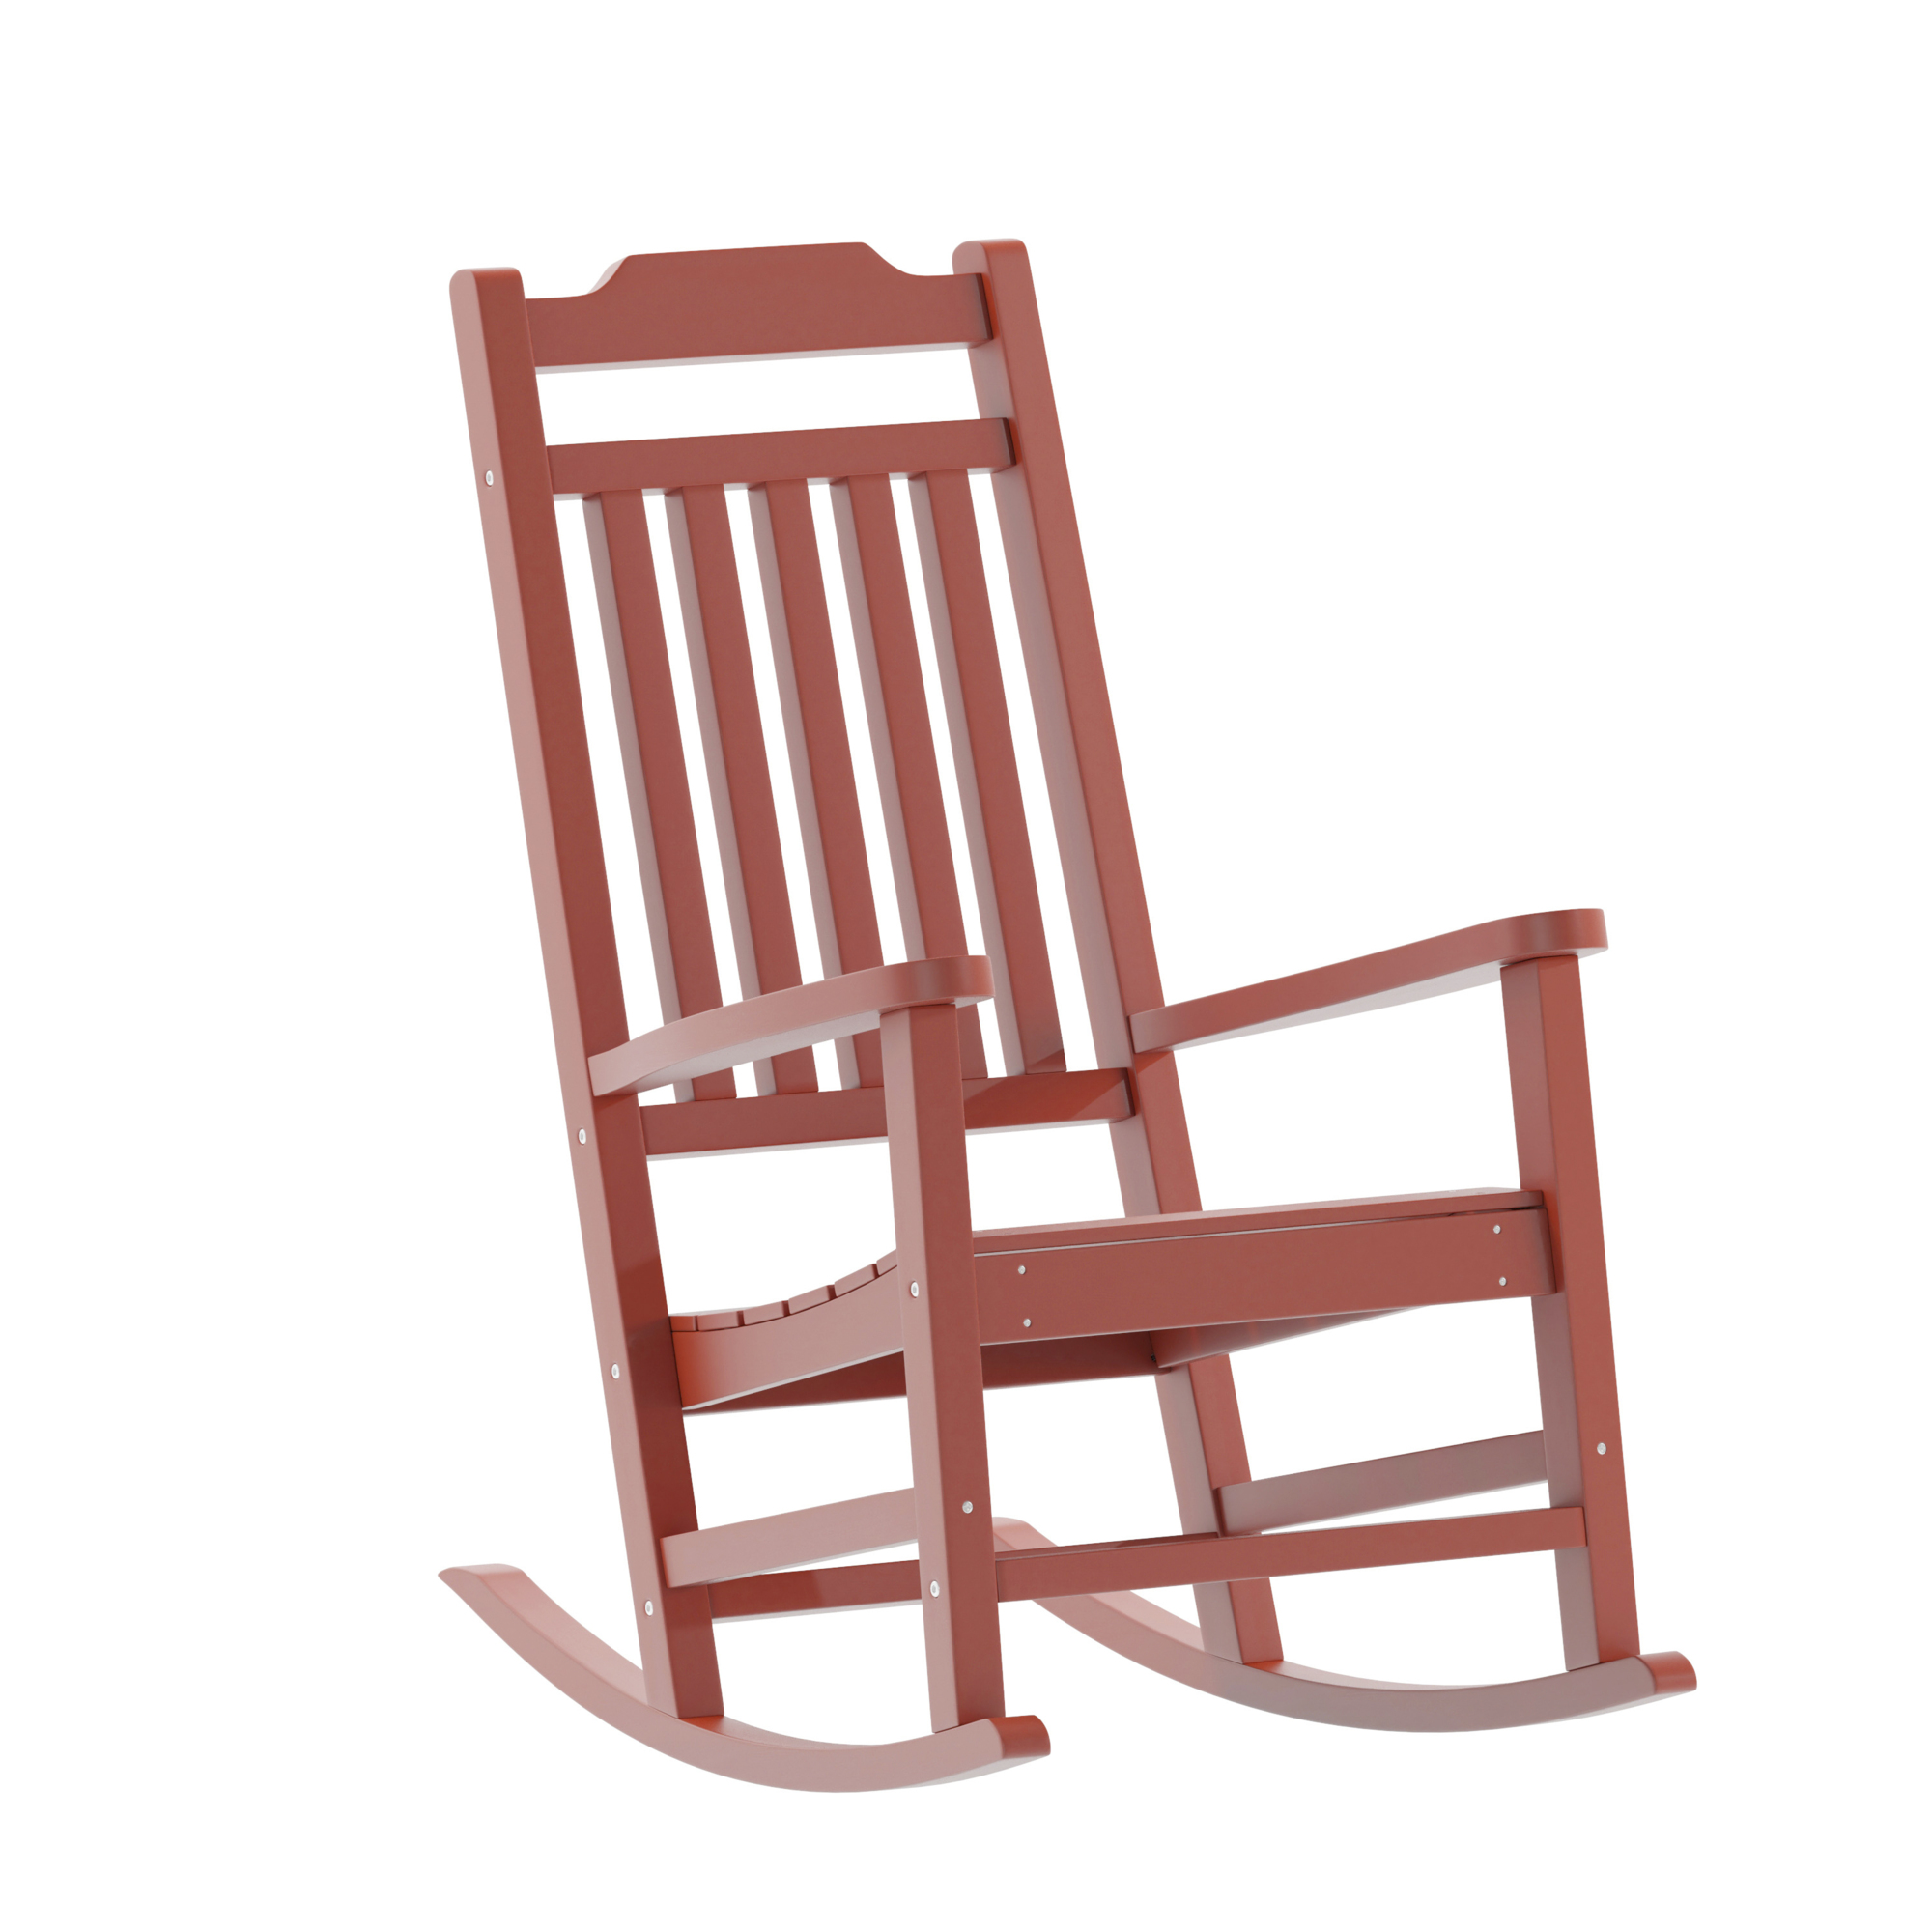 Flash Furniture, All-Weather Poly Resin Rocking Chair in Red, Primary Color Red, Material Polystyrene, Width 25.625 in, Model JJC14703RED